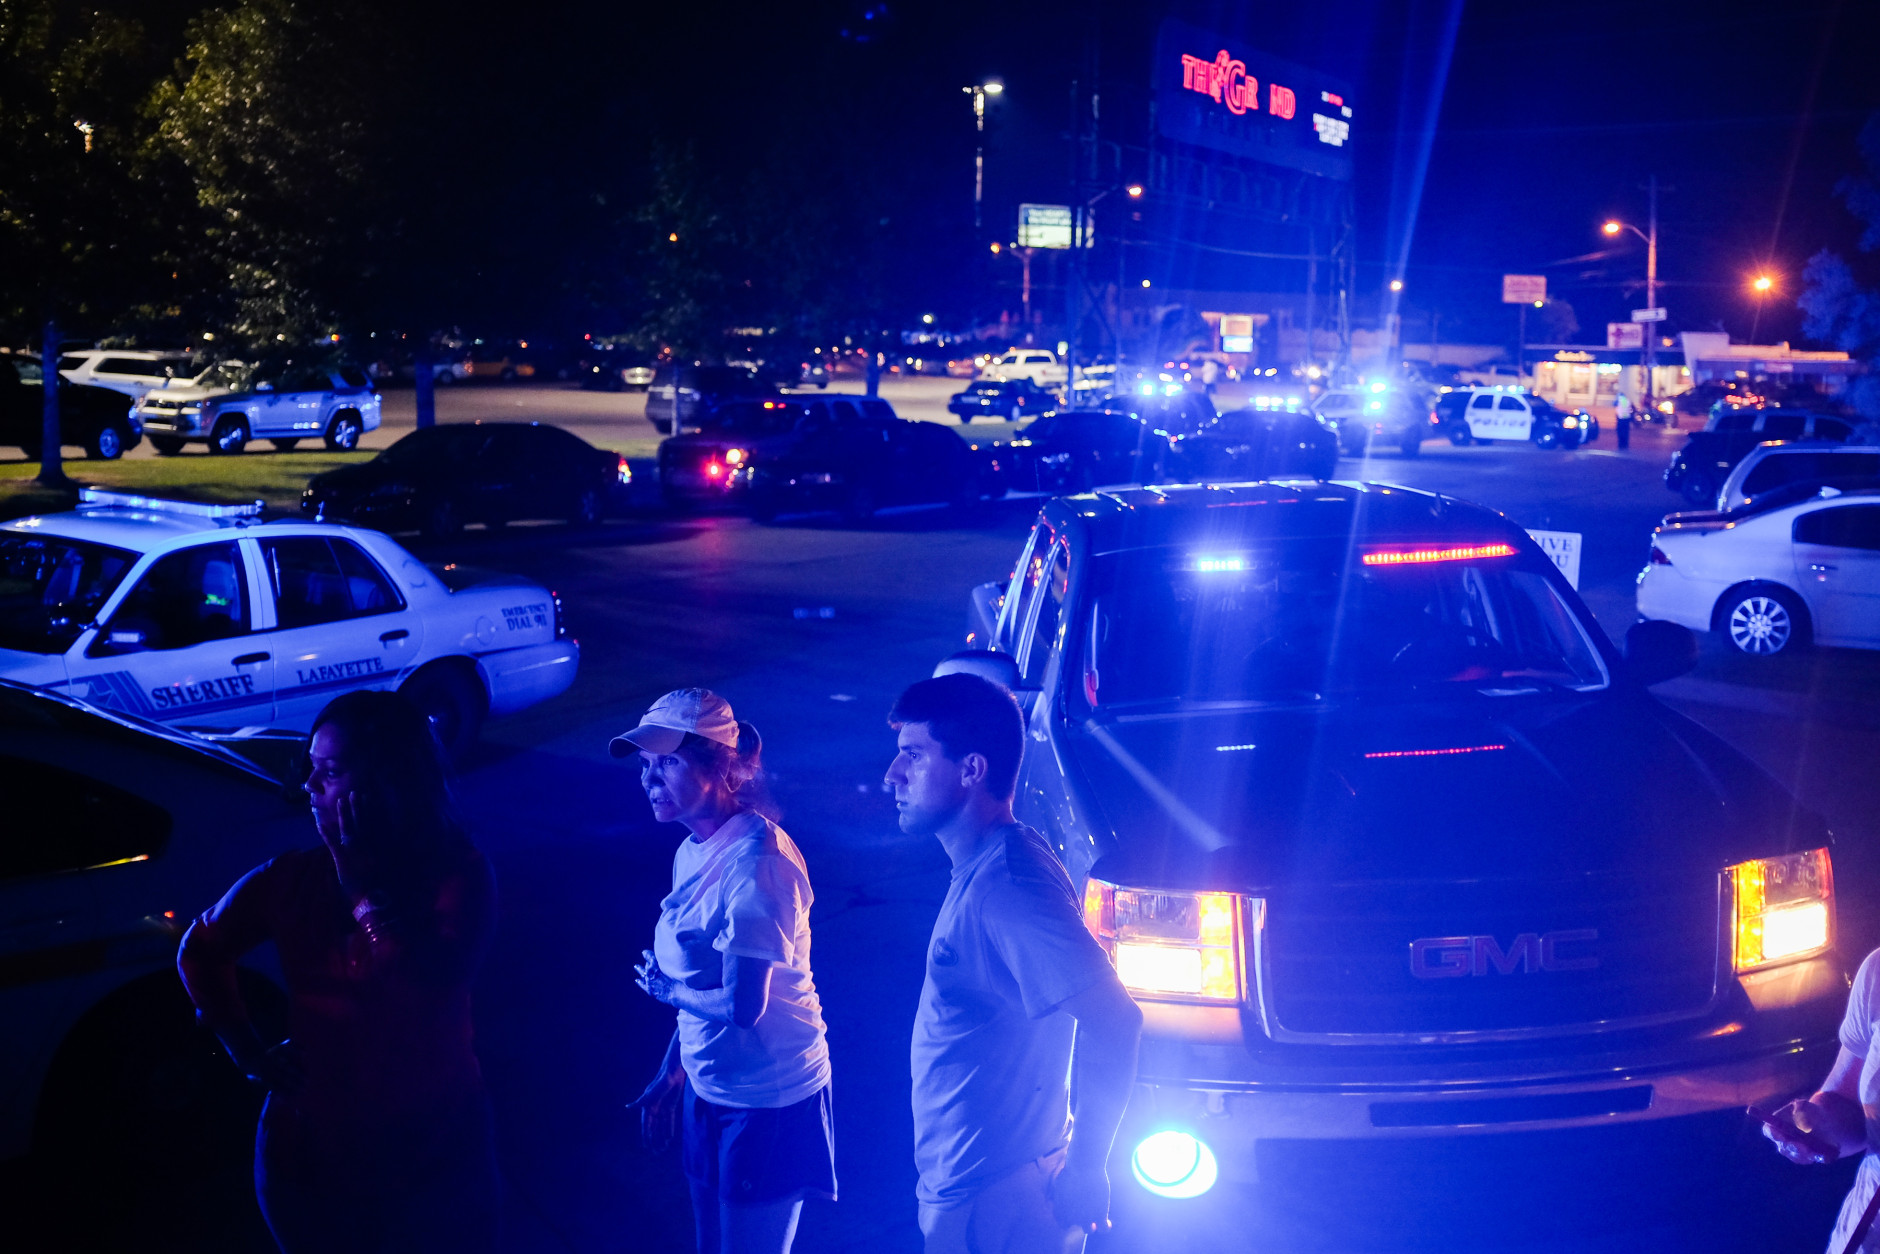 Bystanders look on as emergency personnel respond to the scene of a deadly shooting at the Grand Theatre in Lafayette, La., Thursday, July 23, 2015. (AP Photo/Denny Culbert)